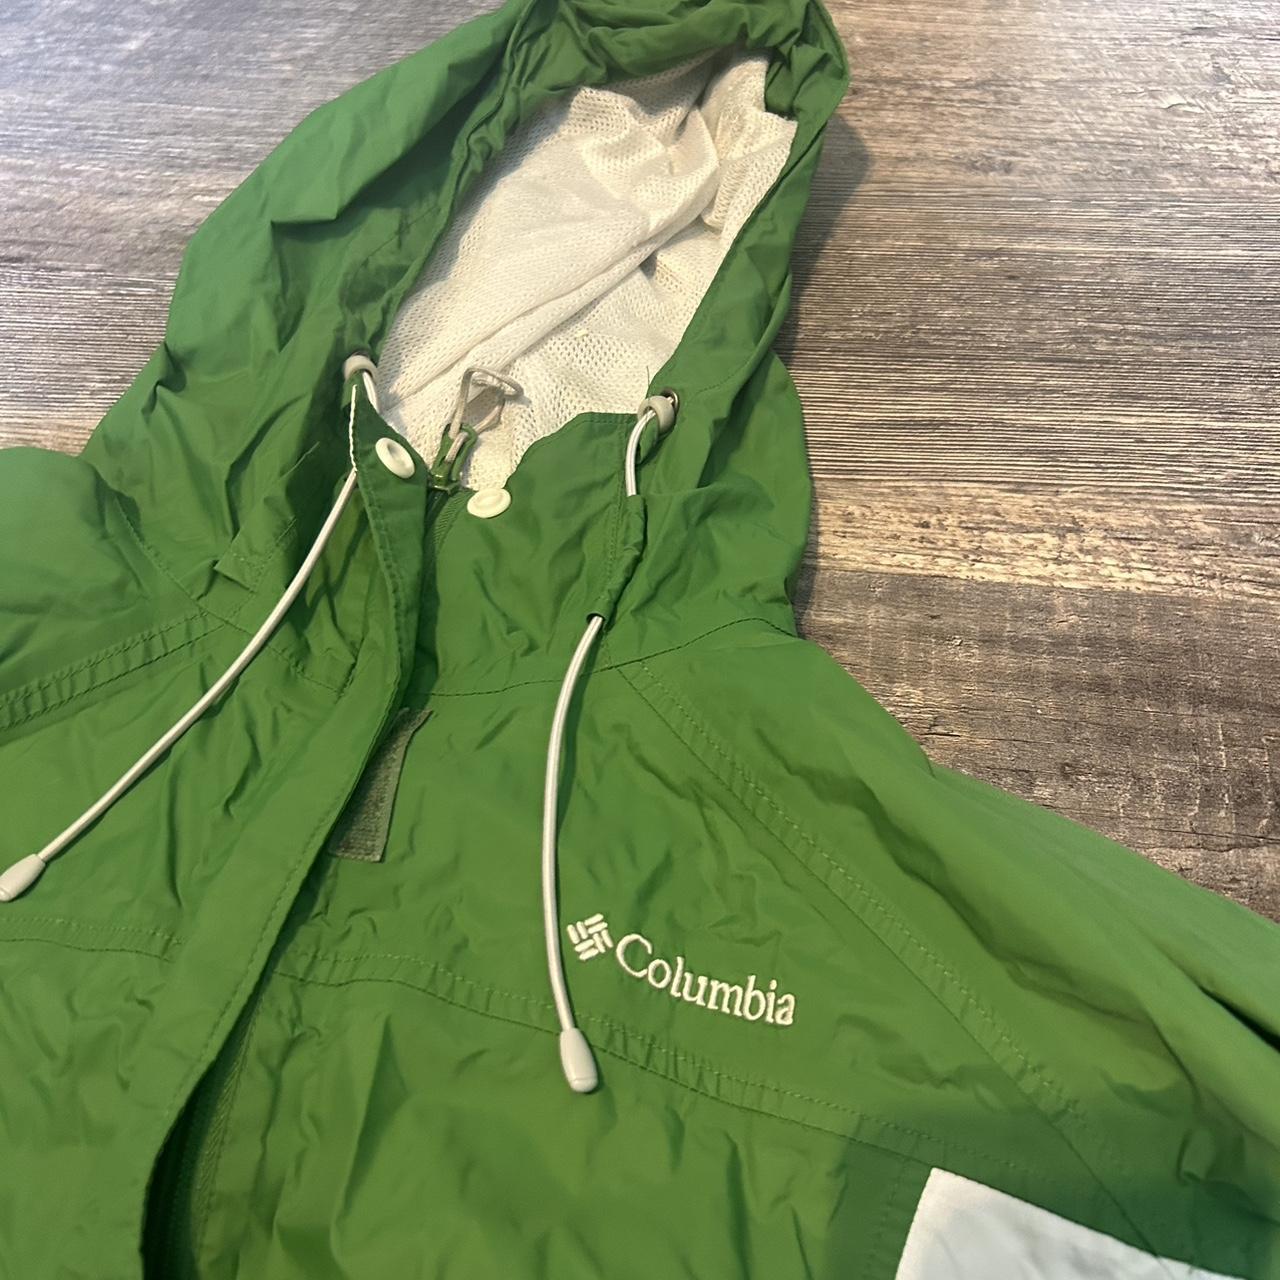 Green and White Columbia Jacket Size L (no... - Depop